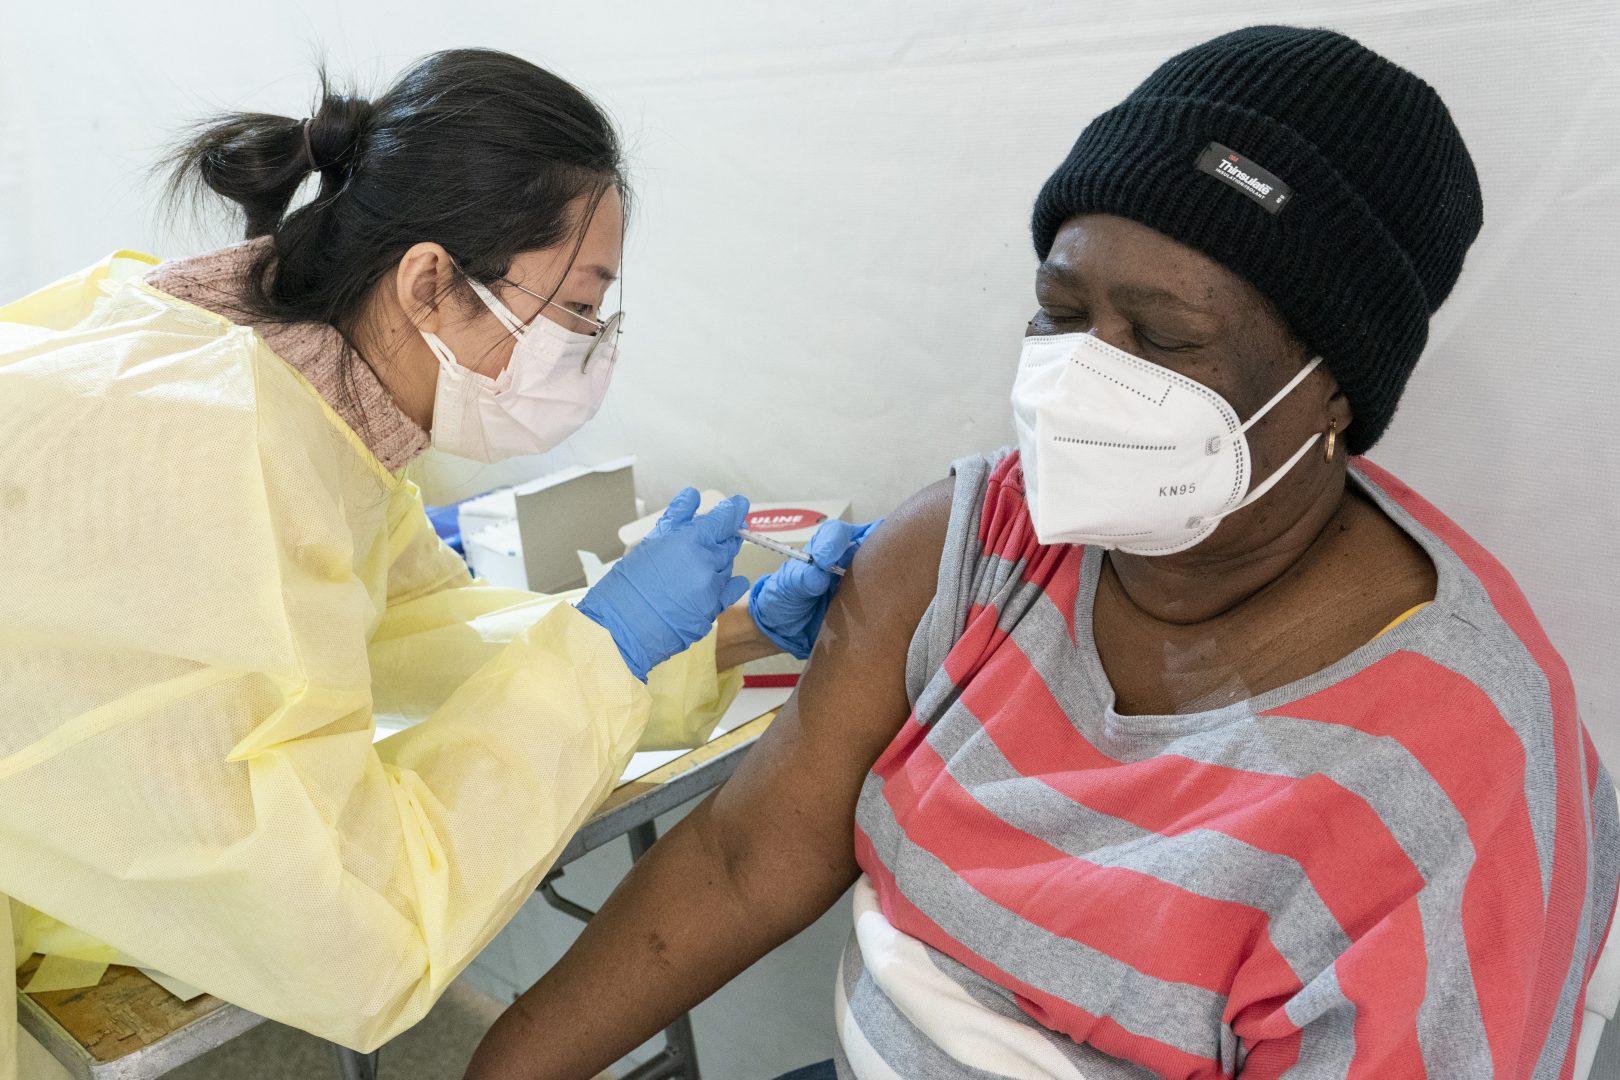 In this Jan. 23, 2021, file photo, registered Nurse Shyun Lin, left, administers Alda Maxis, 70, the first dose of the COVID-19 vaccine at a pop-up vaccination site in the William Reid Apartments in the Brooklyn borough of New York. An increasing number of COVID-19 vaccination sites around the U.S. are canceling appointments because of vaccine shortages in a rollout so rife with confusion and unexplained bottlenecks. 